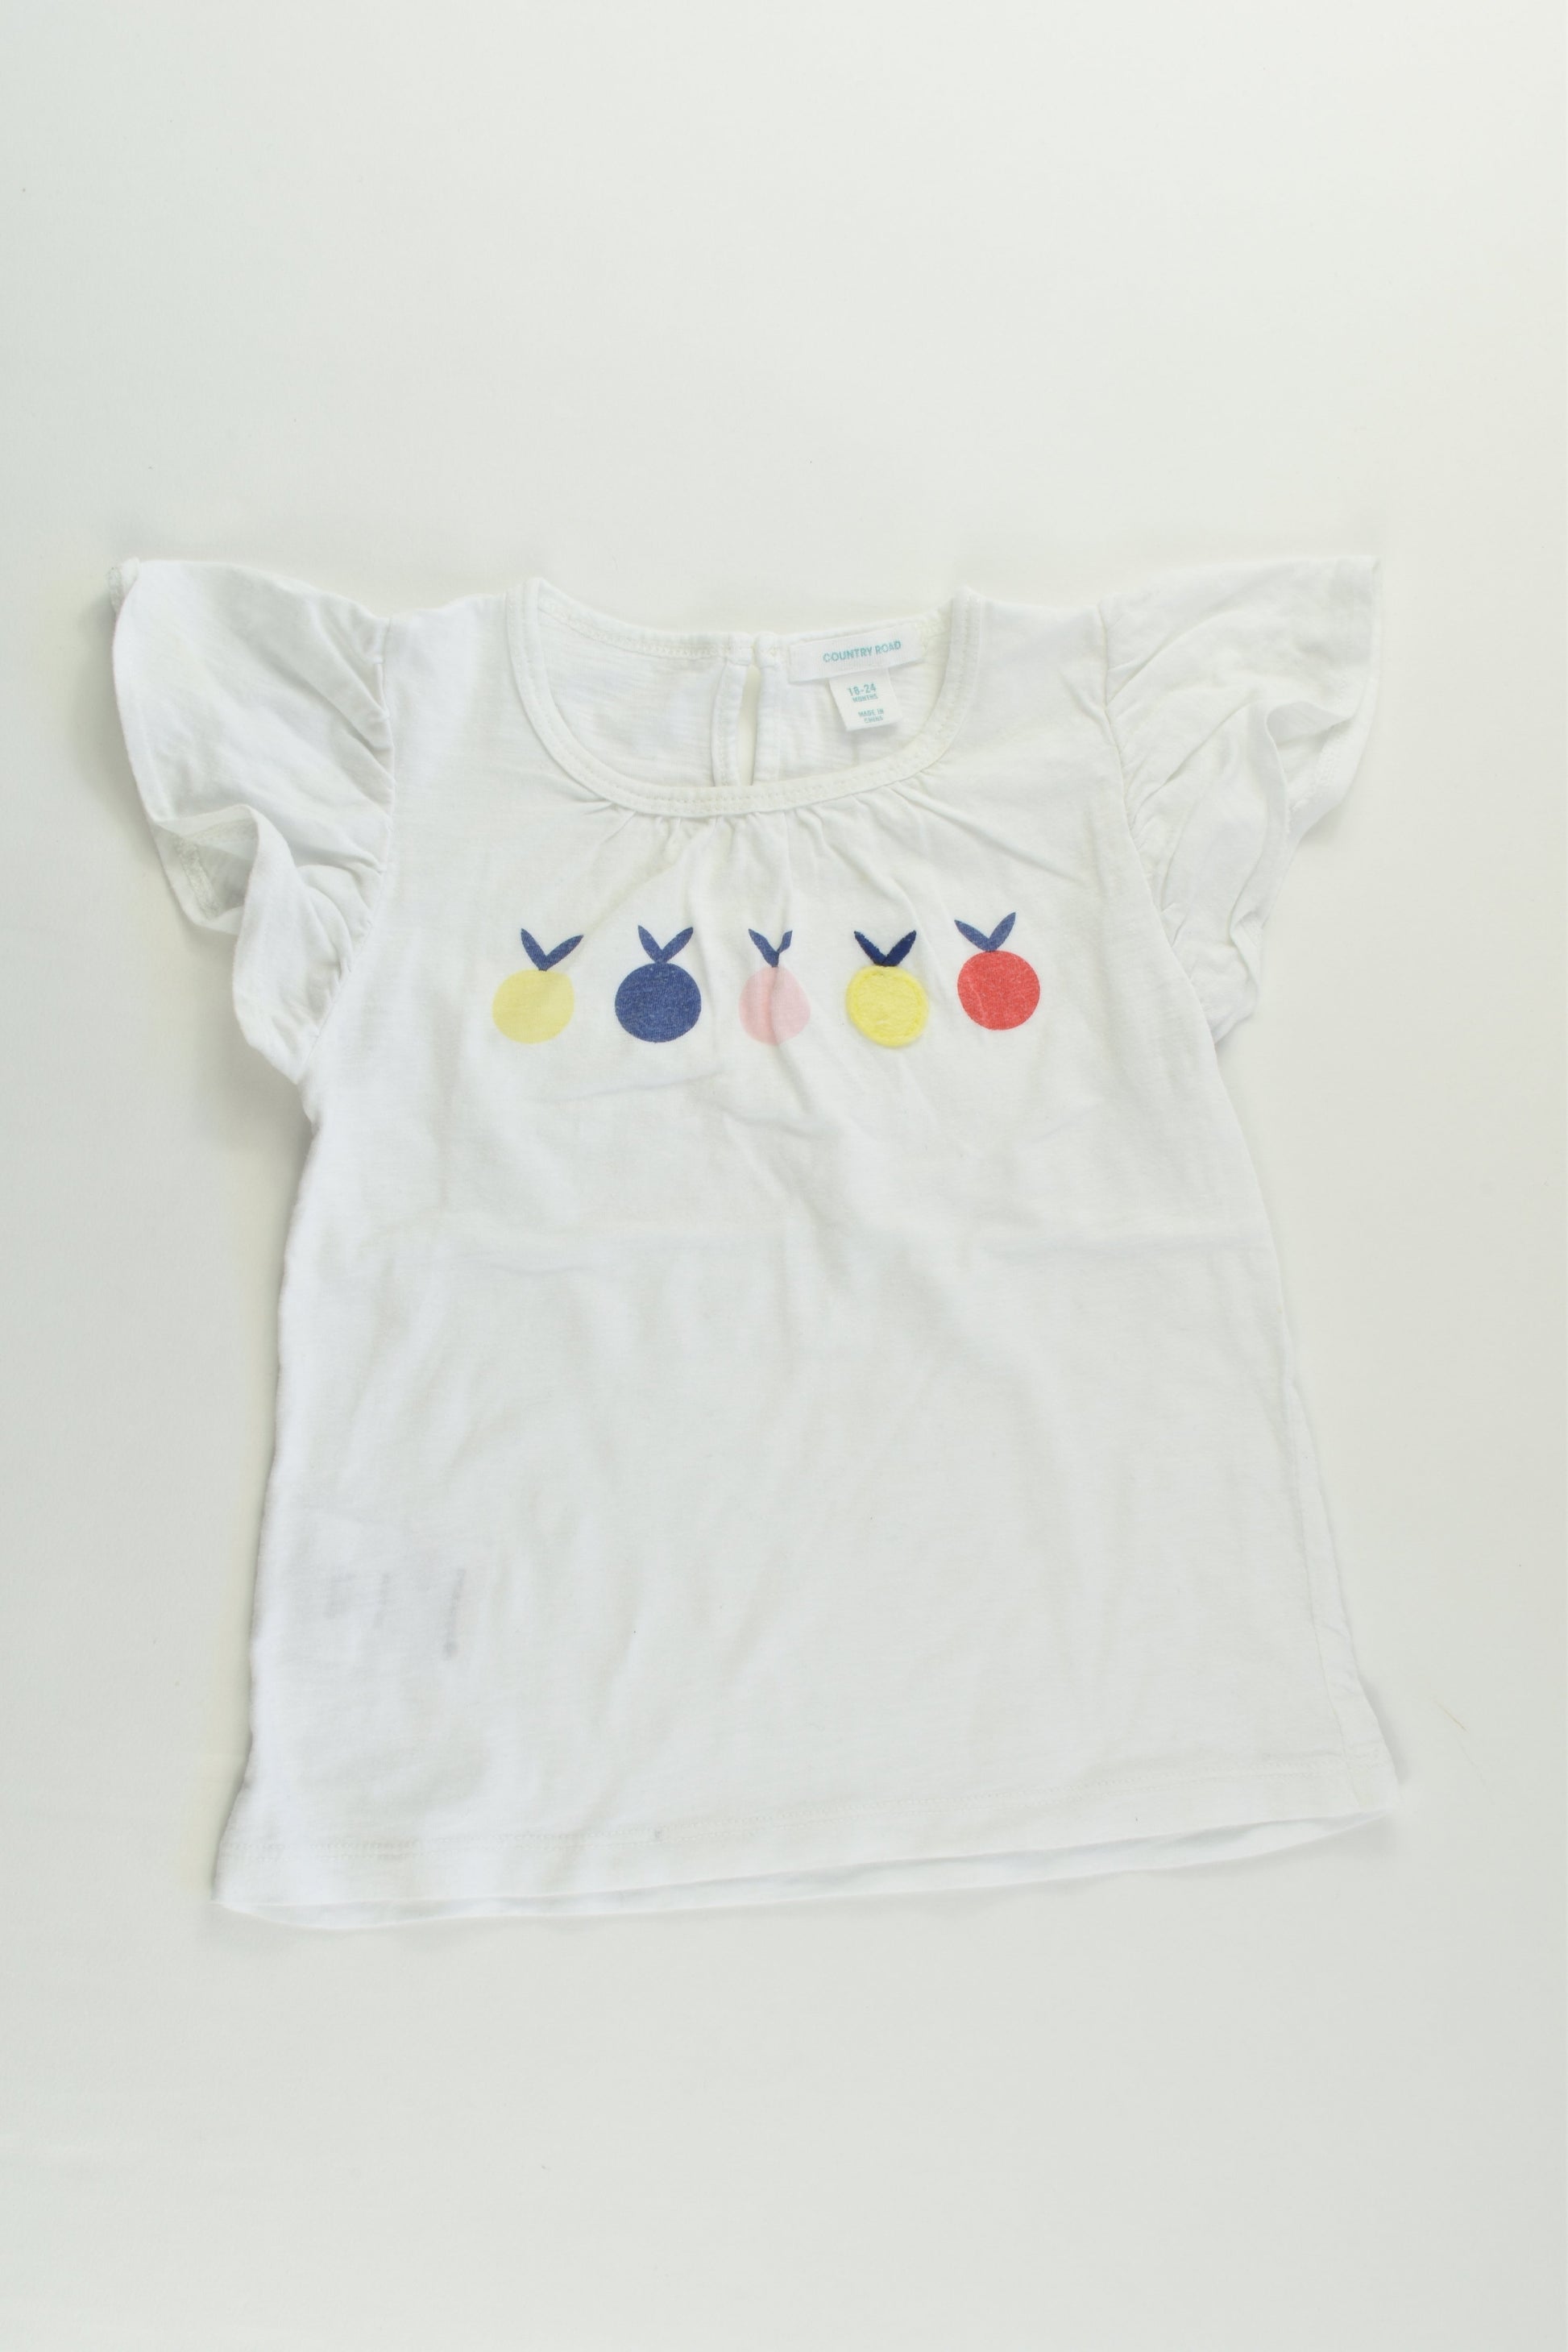 Country Road Size 2 (18-24 months) Fruit T-shirt